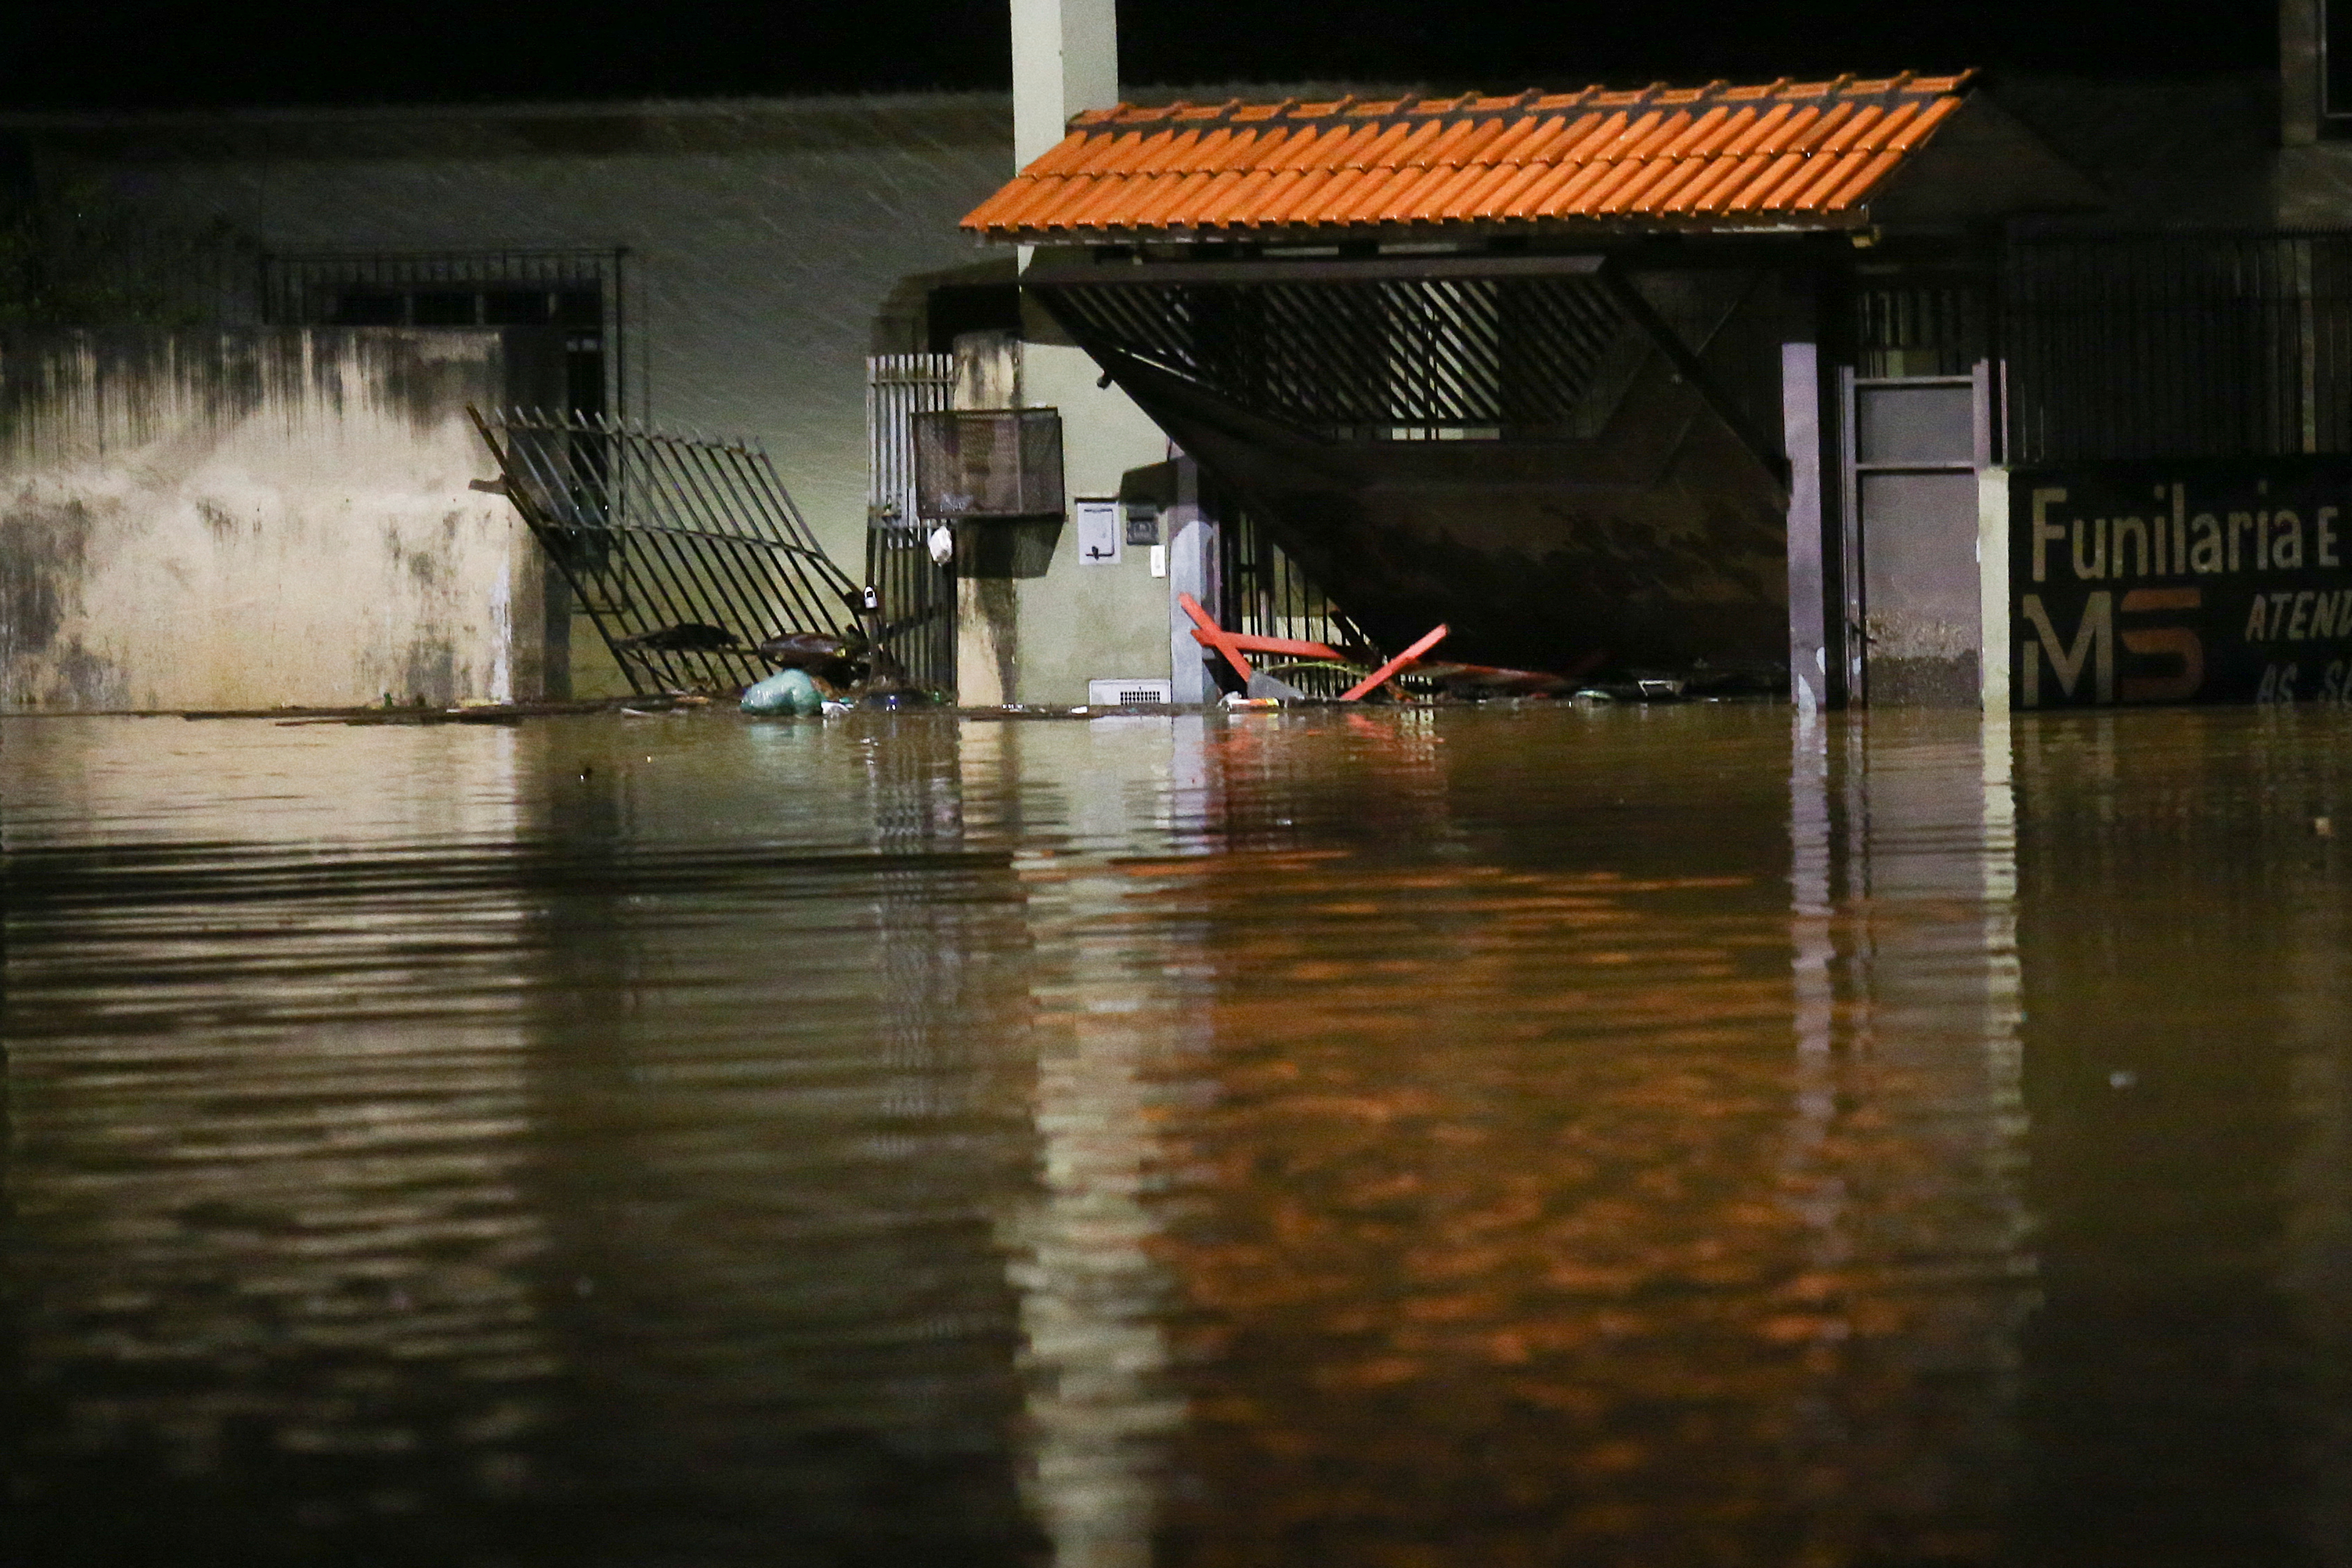 Flooding caused by heavy rain in Caieiras, Brazil